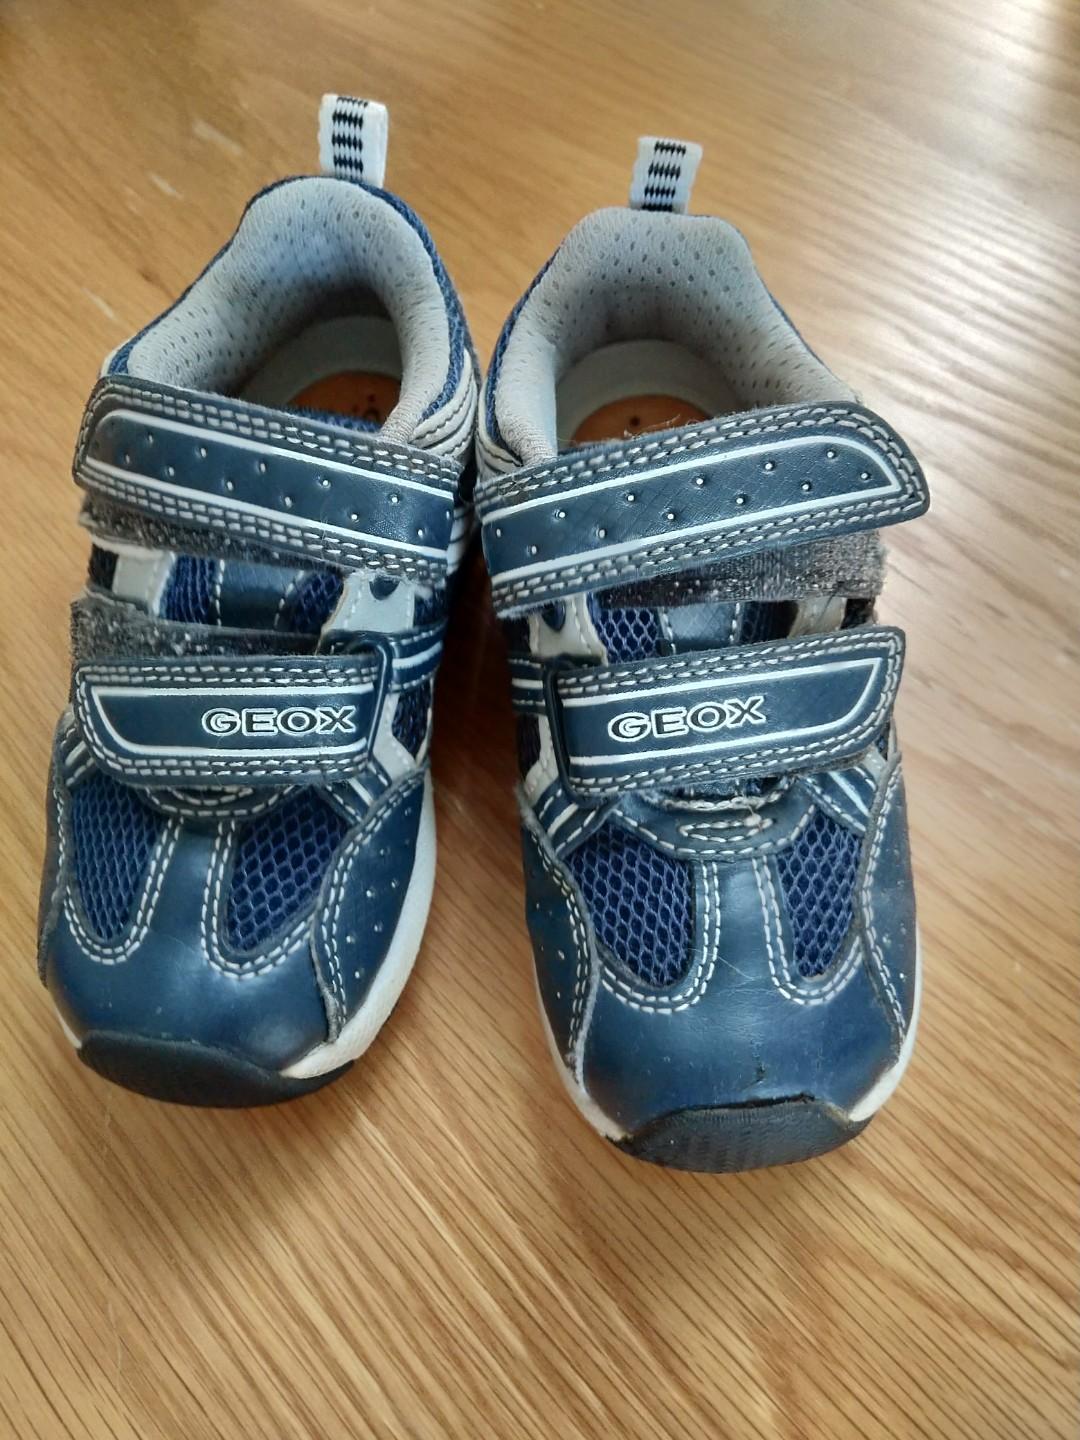 infant size 6 shoes in eu